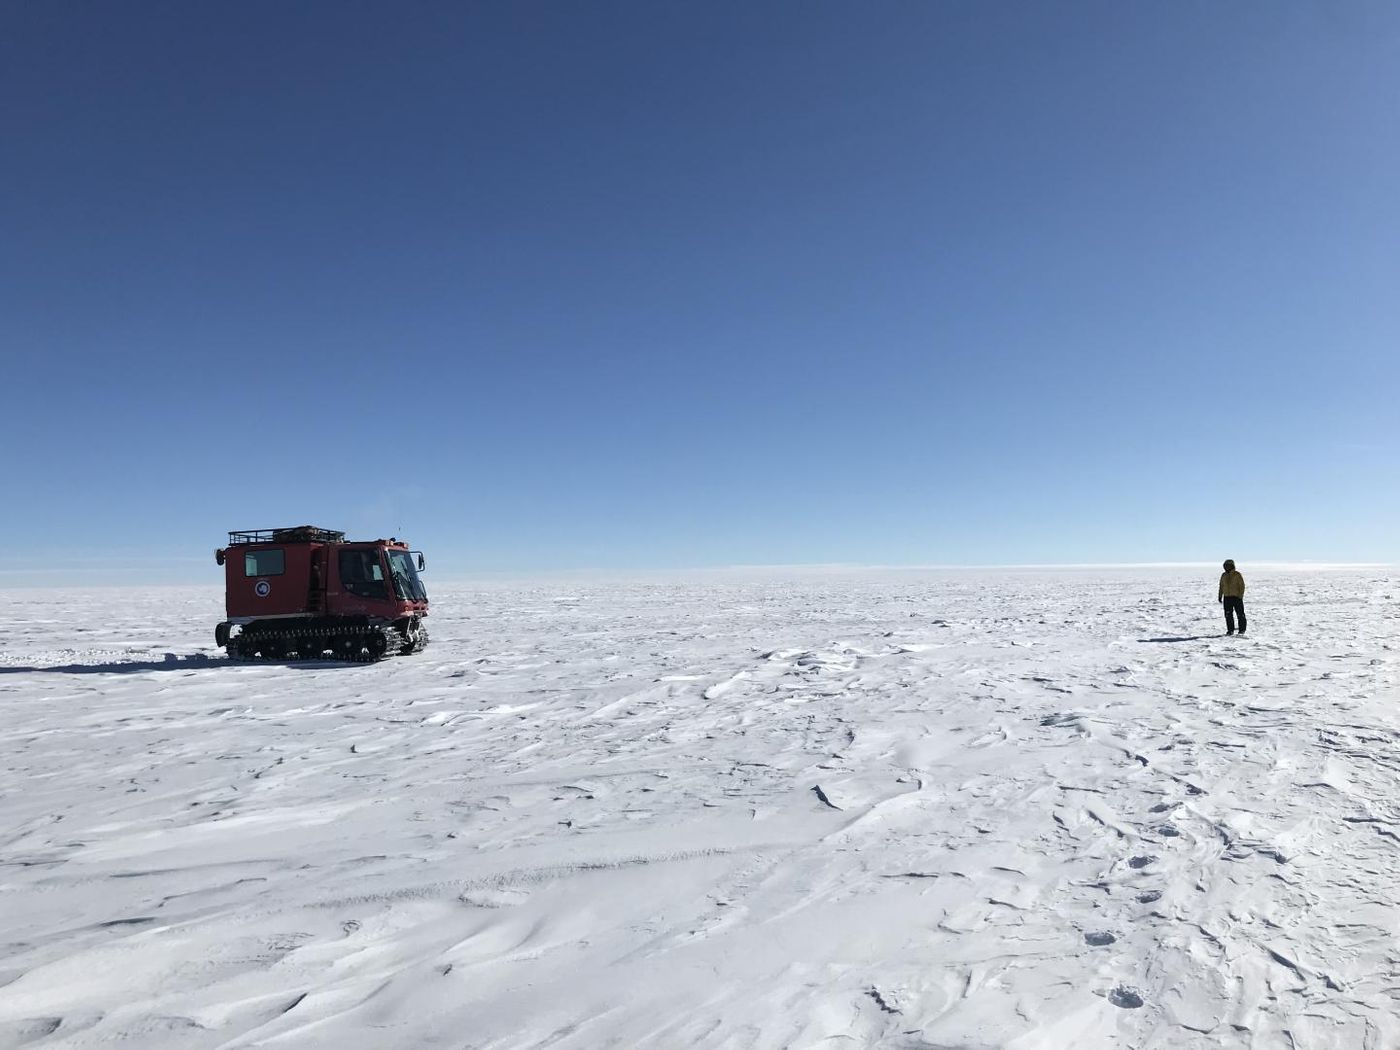 NASA scientists on the Antarctic Ice Sheet during a 470-mile expedition in 2019, meant to assess the accuracy of data gathered in space by the Ice Cloud and land Elevation Satellite-2 (ICESat-2). / Credit: NASA's Goddard Space Flight Center/Dr. Kelly Brunt